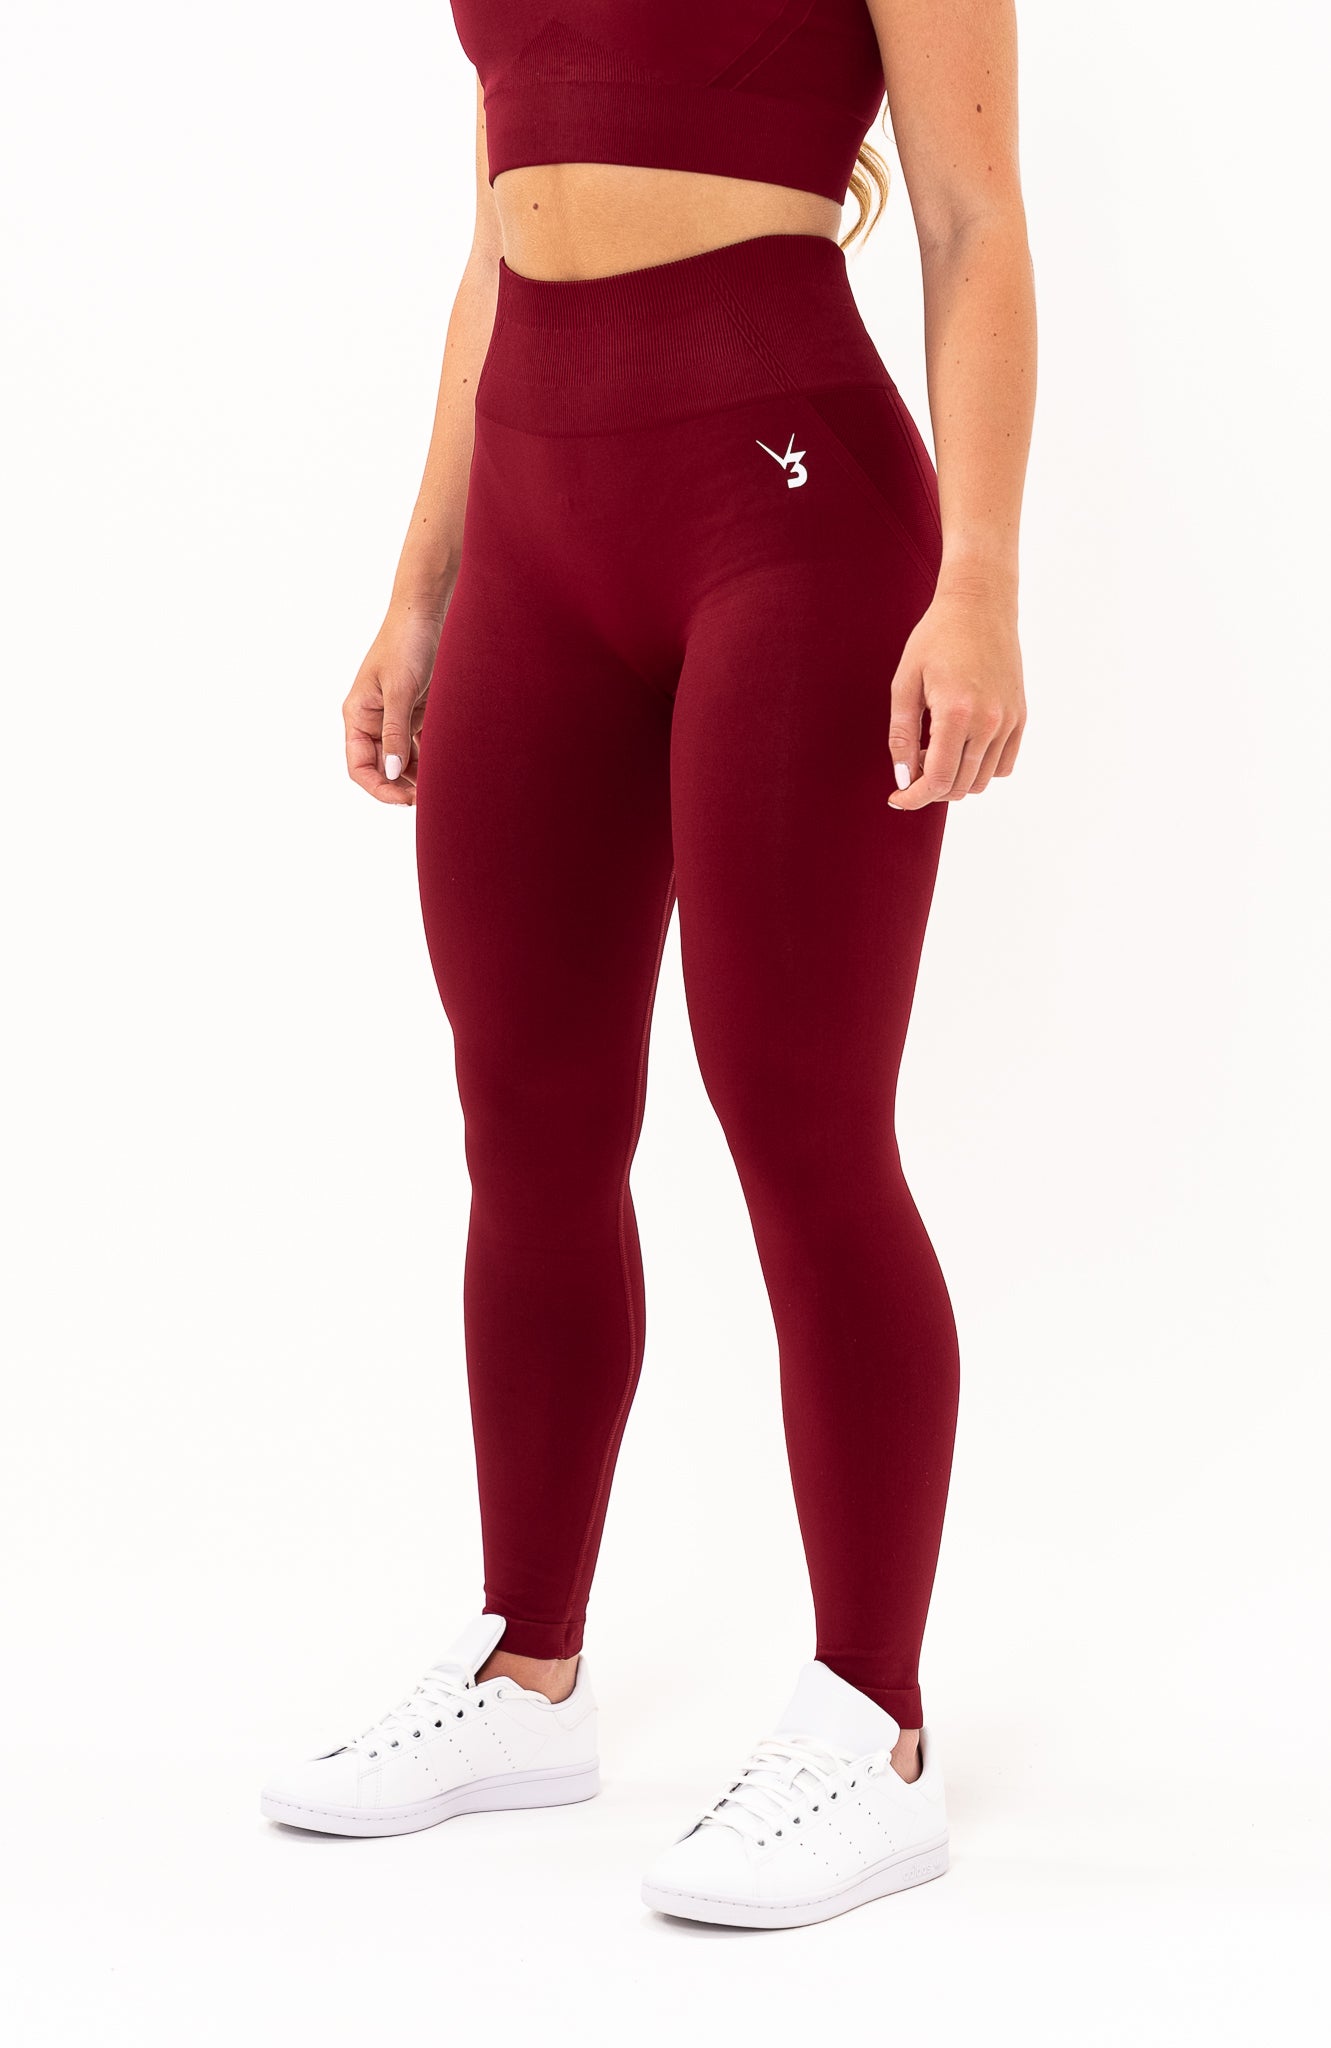 redbaysand Women's Tempo seamless scrunch bum shaping high waisted leggings in burgundy red – Squat proof sports tights for Gym workouts training, Running, yoga, bodybuilding and bikini fitness.